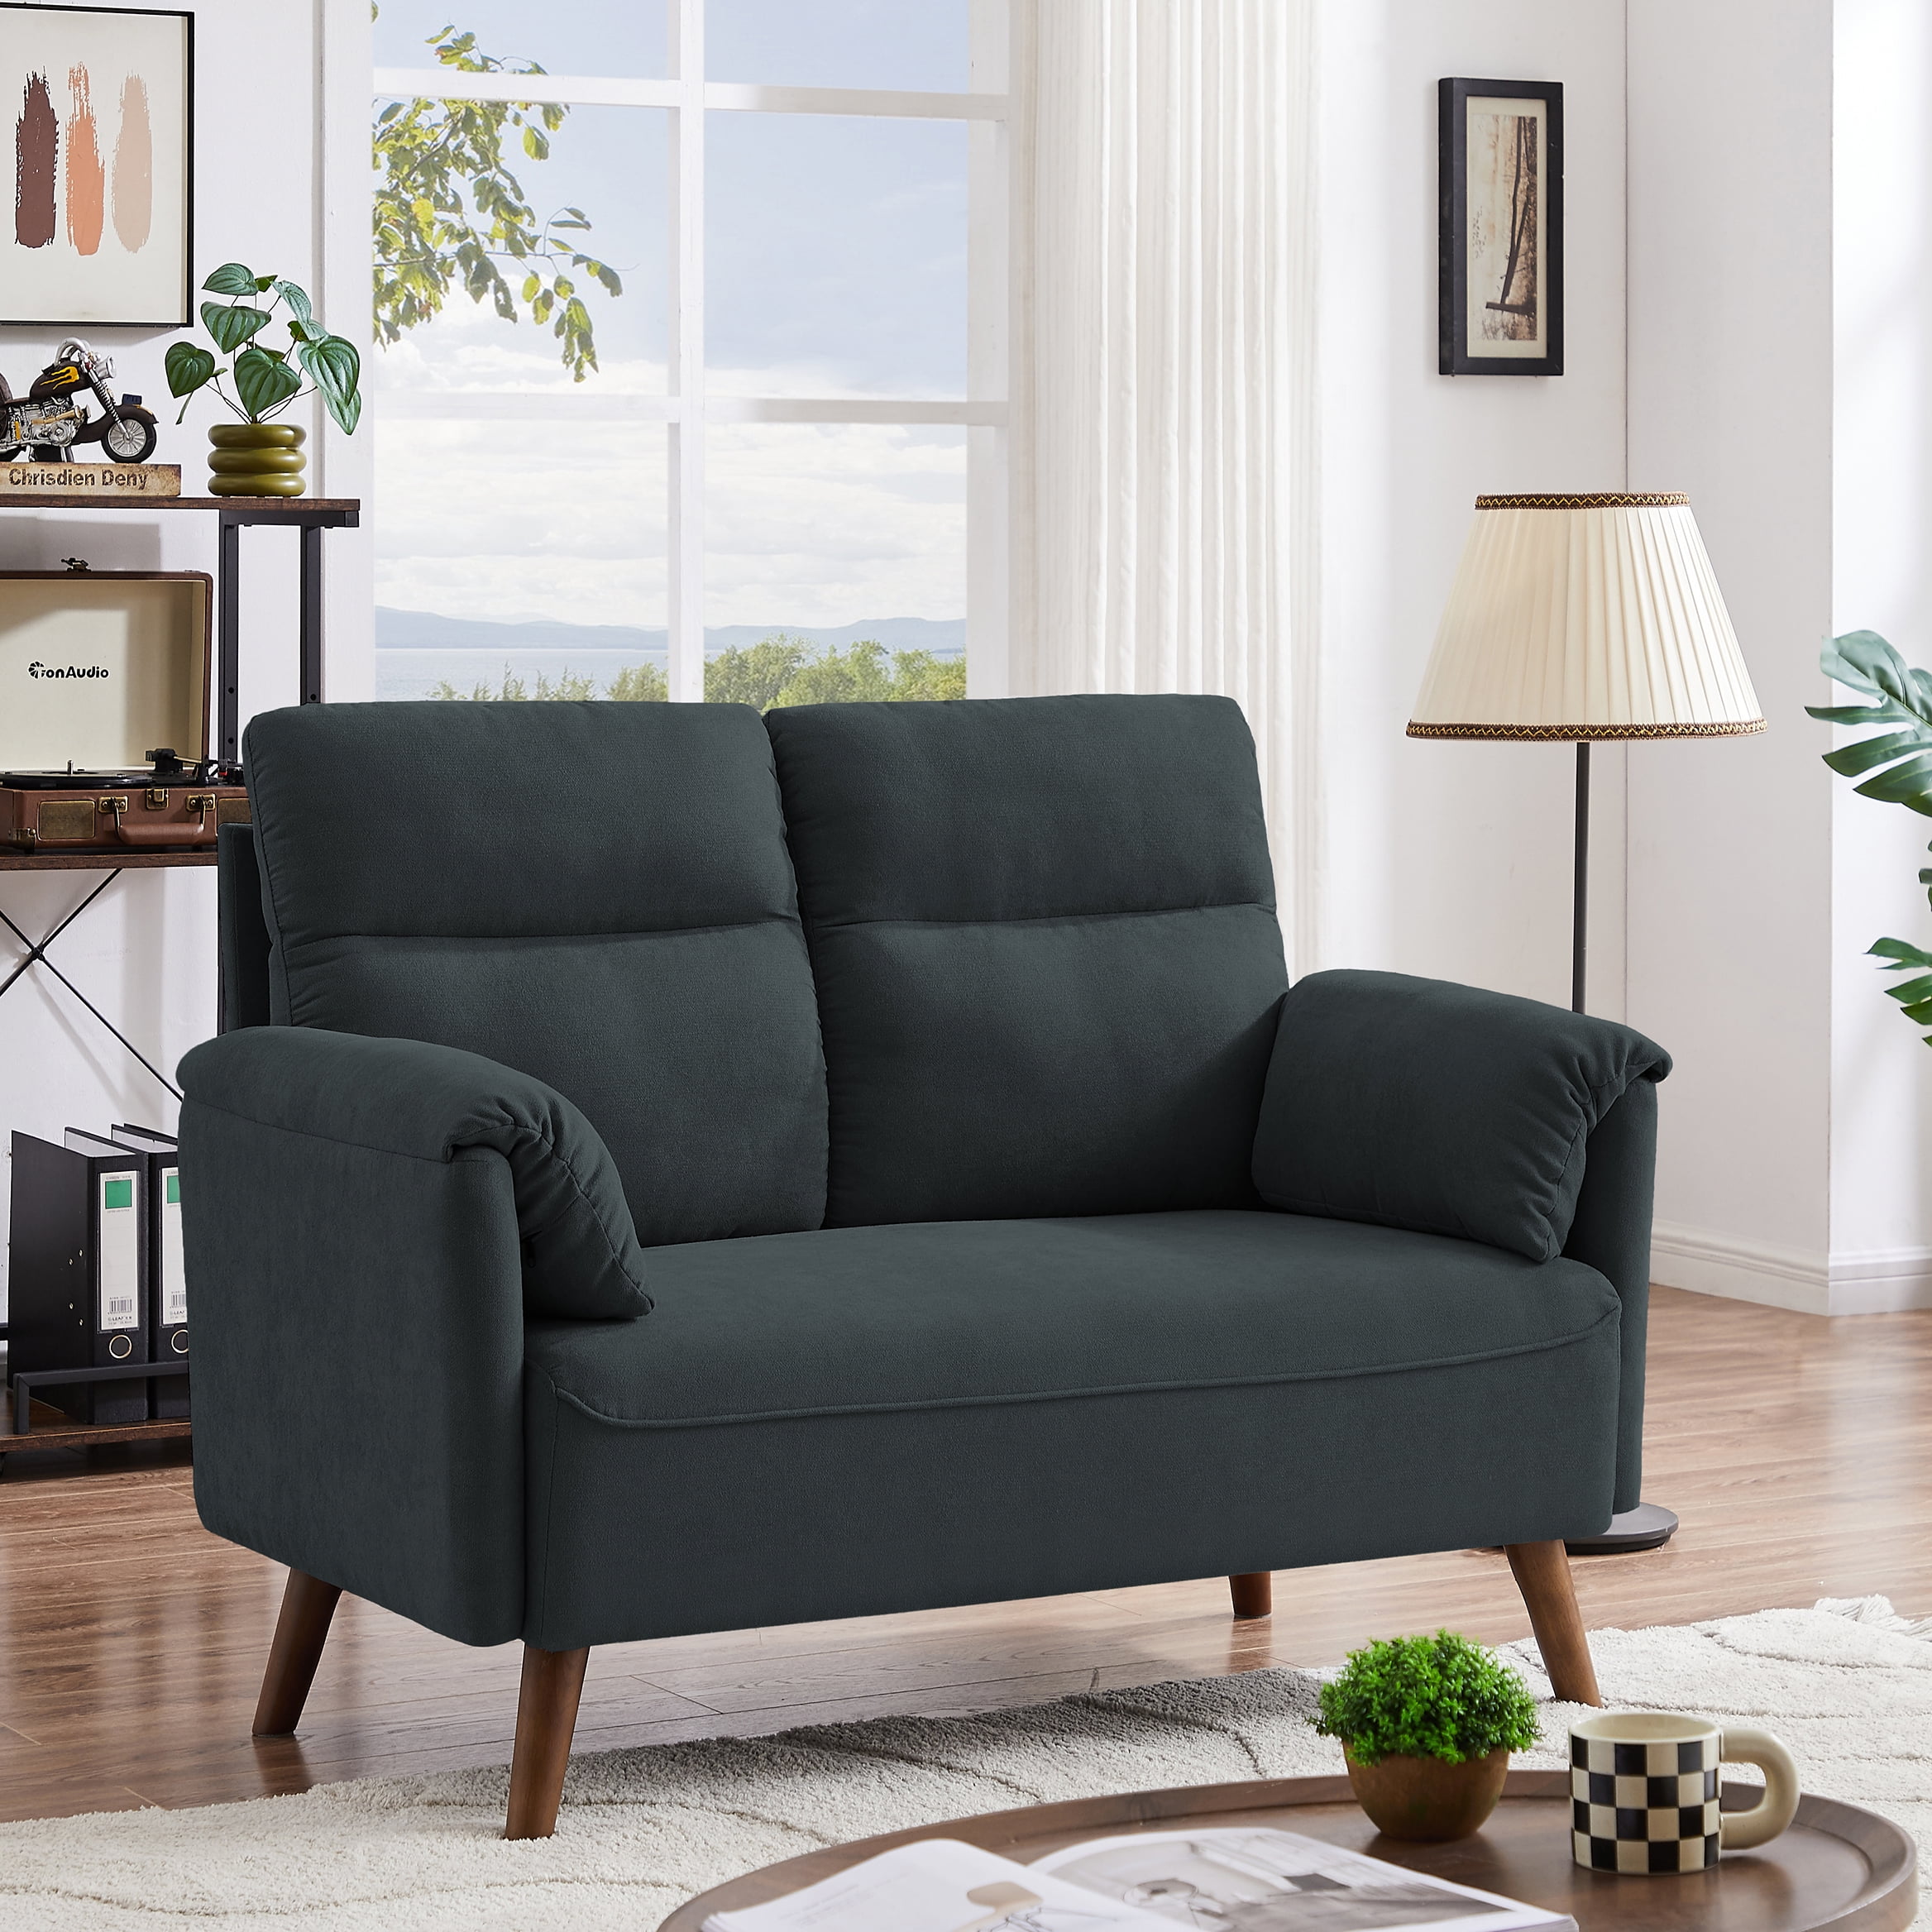 Jarenie 50.6 Small Loveseat Sofa, Mid Century Modern Love Seat Couch with  Back Cushions and Wood Legs, 2 Seater Small Couches for Living Room